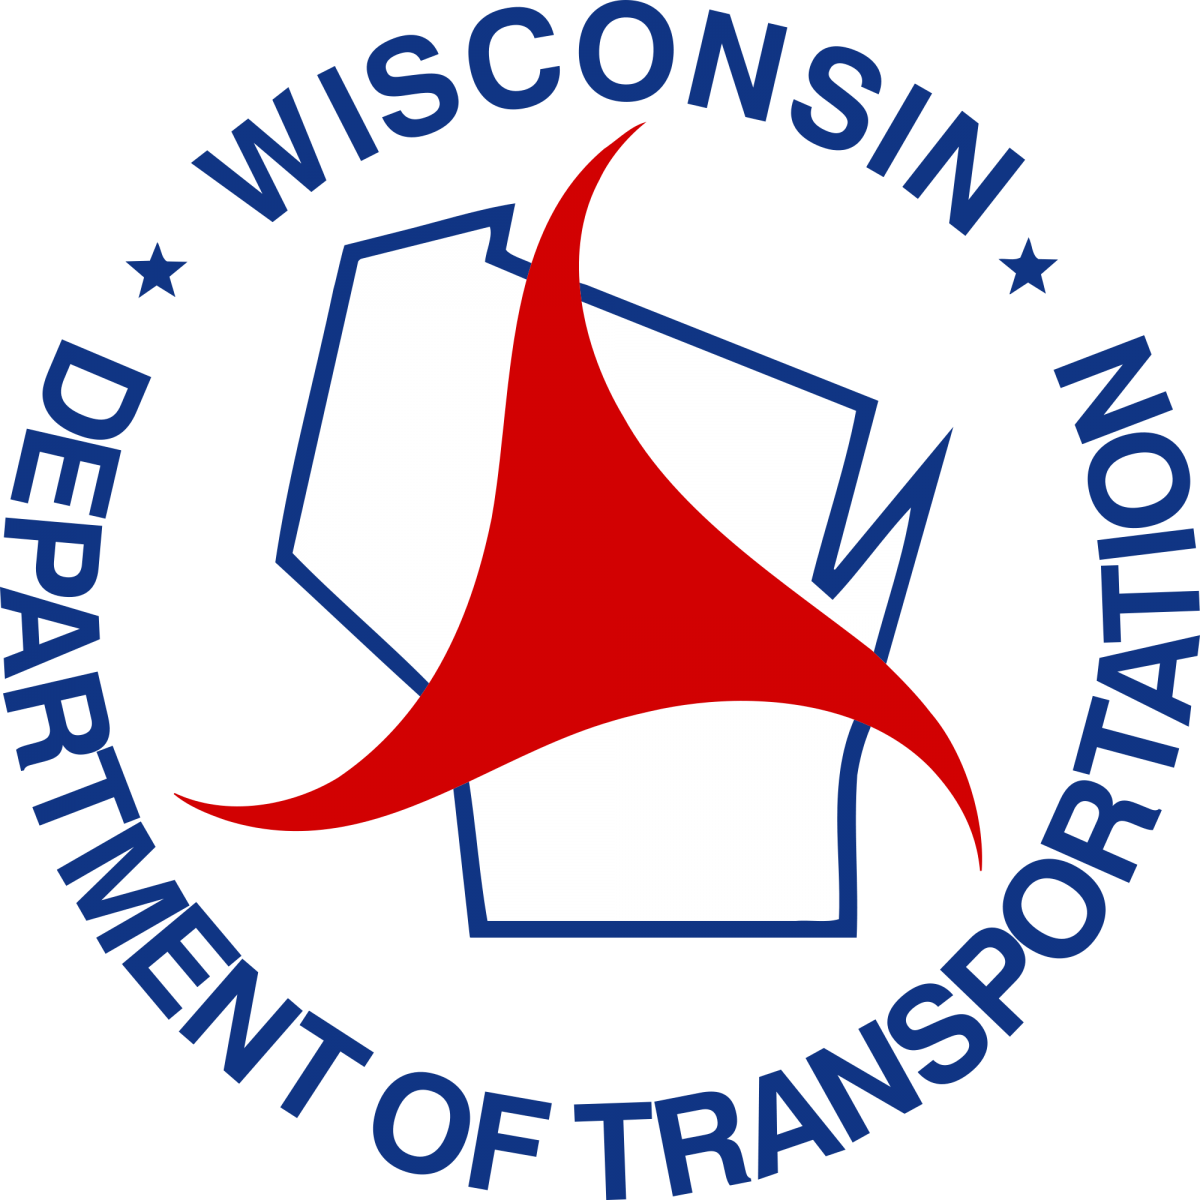 Local governments receive more than $99 million in transportation aid